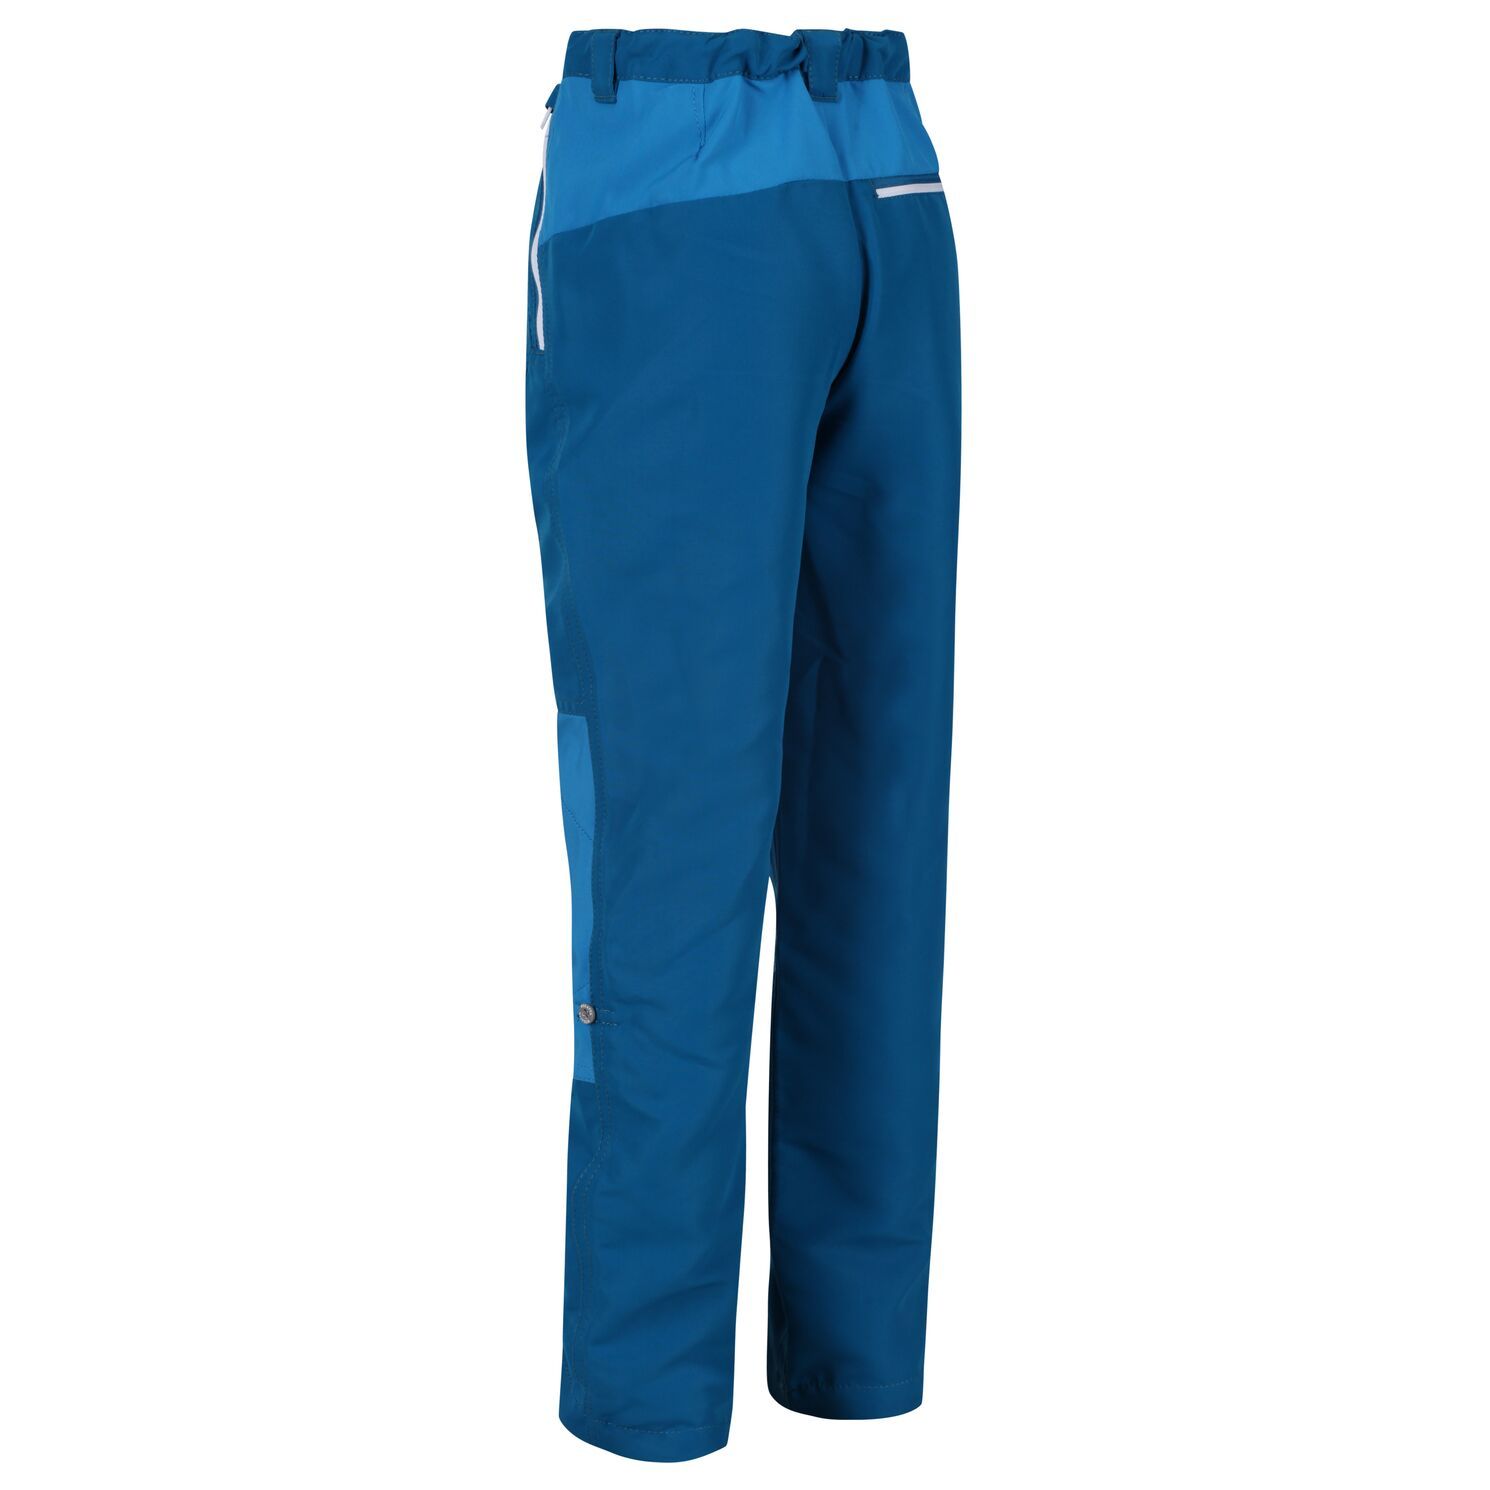 Material: 100% polyester. 100% lightweight polyamide fabric. Stretch fabric inserts. Durable water repellent finish. UV Protection (UPF) of 40+. Quick drying. Crease resistant. Part-elasticated waist with button adjustment system. Multi pocketed with front and rear zipped pockets. Convert from trouser to capri. Reflective trim. Waist sizes to fit: (3-4 Yrs): 53-54cm, (5-6 Yrs): 55-57cm, (7-8 Yrs): 58-60cm, (9-10 Yrs): 61-64cm, (11-12 Yrs): 65-66cm, (13 Yrs): 69cm, (14 Yrs): 73cm, (15-16 Yrs): 76-79cm.